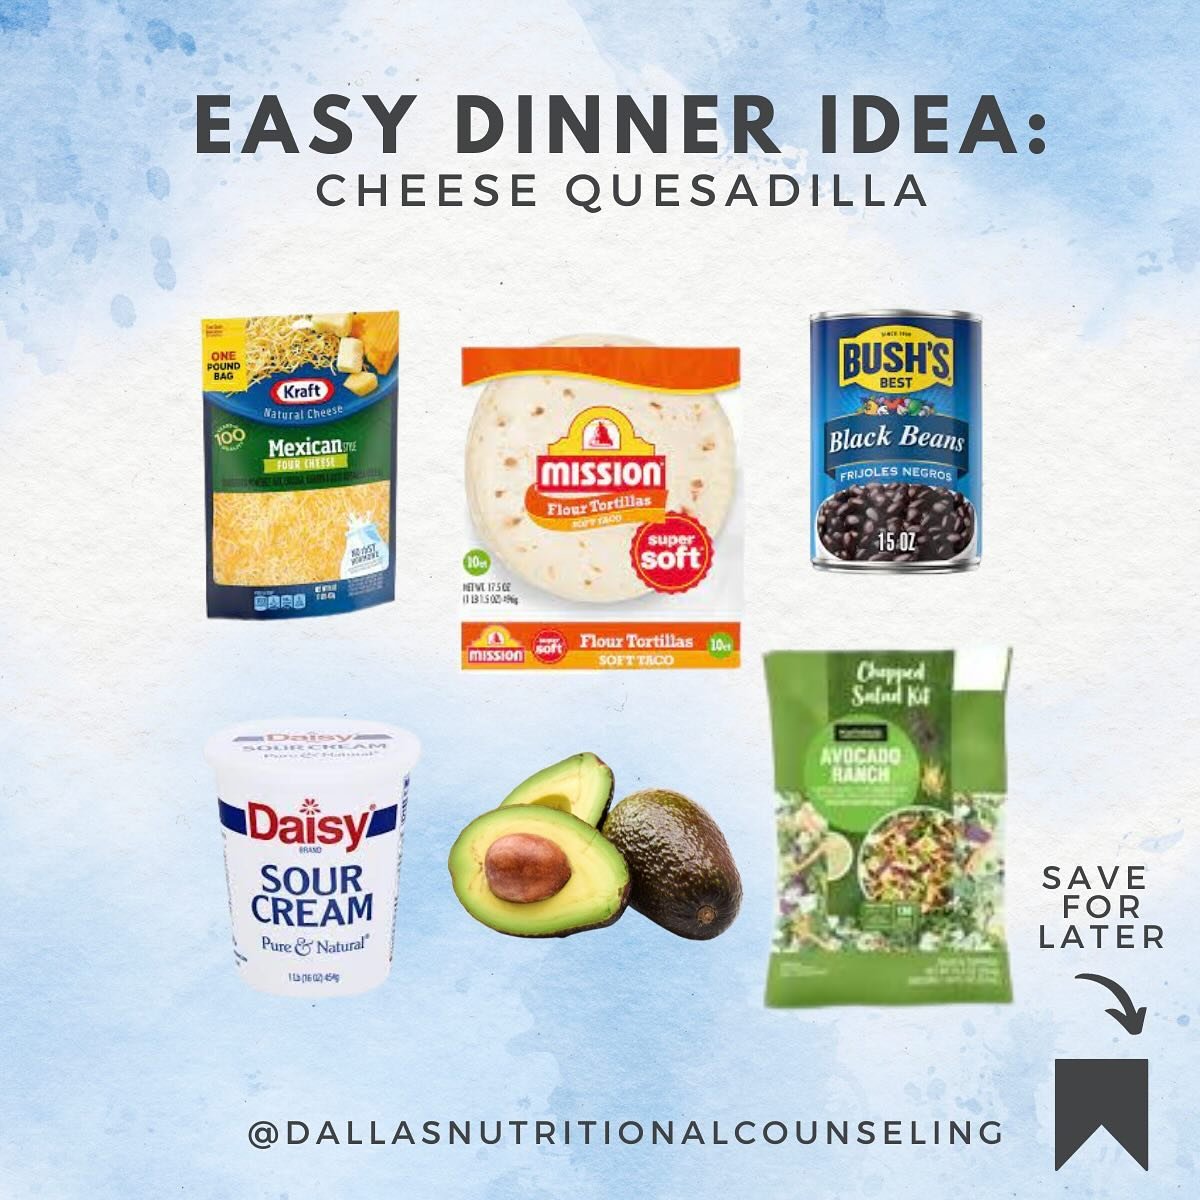 EASY DINNER ALERT 

Hit save to come back to this later. 

This is one of our go-to quick dinners that you can customize depending on your mood and preferences. 

✨Cheese Quesdilla✨

Ingredients:
- 1 package of tortillas
- Shredded cheese
- Black bea